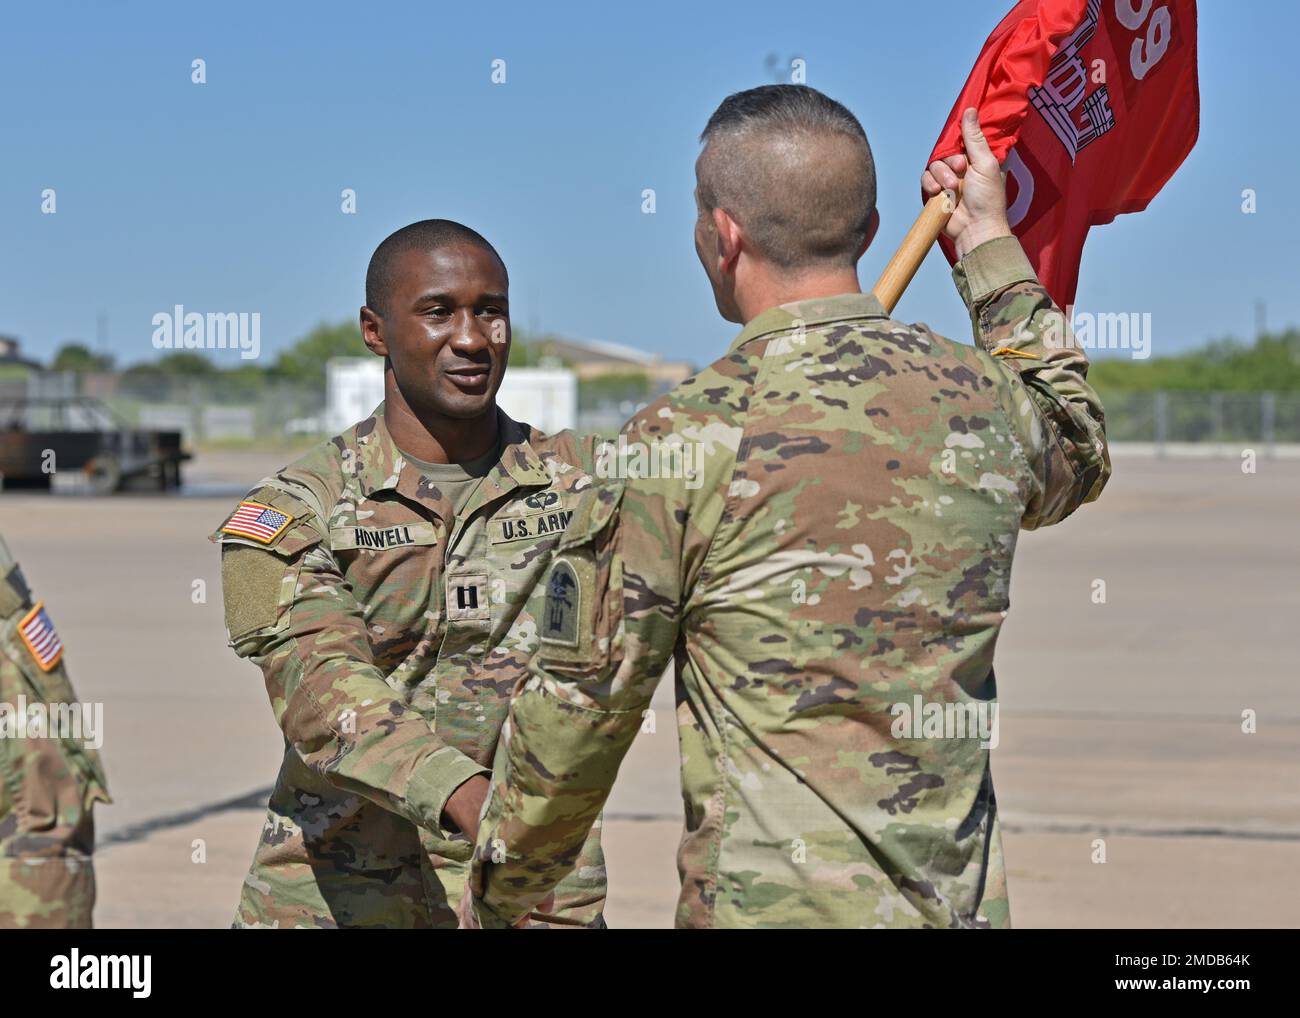 U.S. Army Capt. Jarred Howell, left, incoming Delta Company 169th Engineer Battalion commander, passes the guidon to 1st Sgt. Elisha Conway, D CO 169th EN BN first sergeant, during their change of command at Goodfellow Air Force Base, Texas, July 15, 2022. Howell was previously the commander of Bravo Company 169th EN BN. Stock Photo